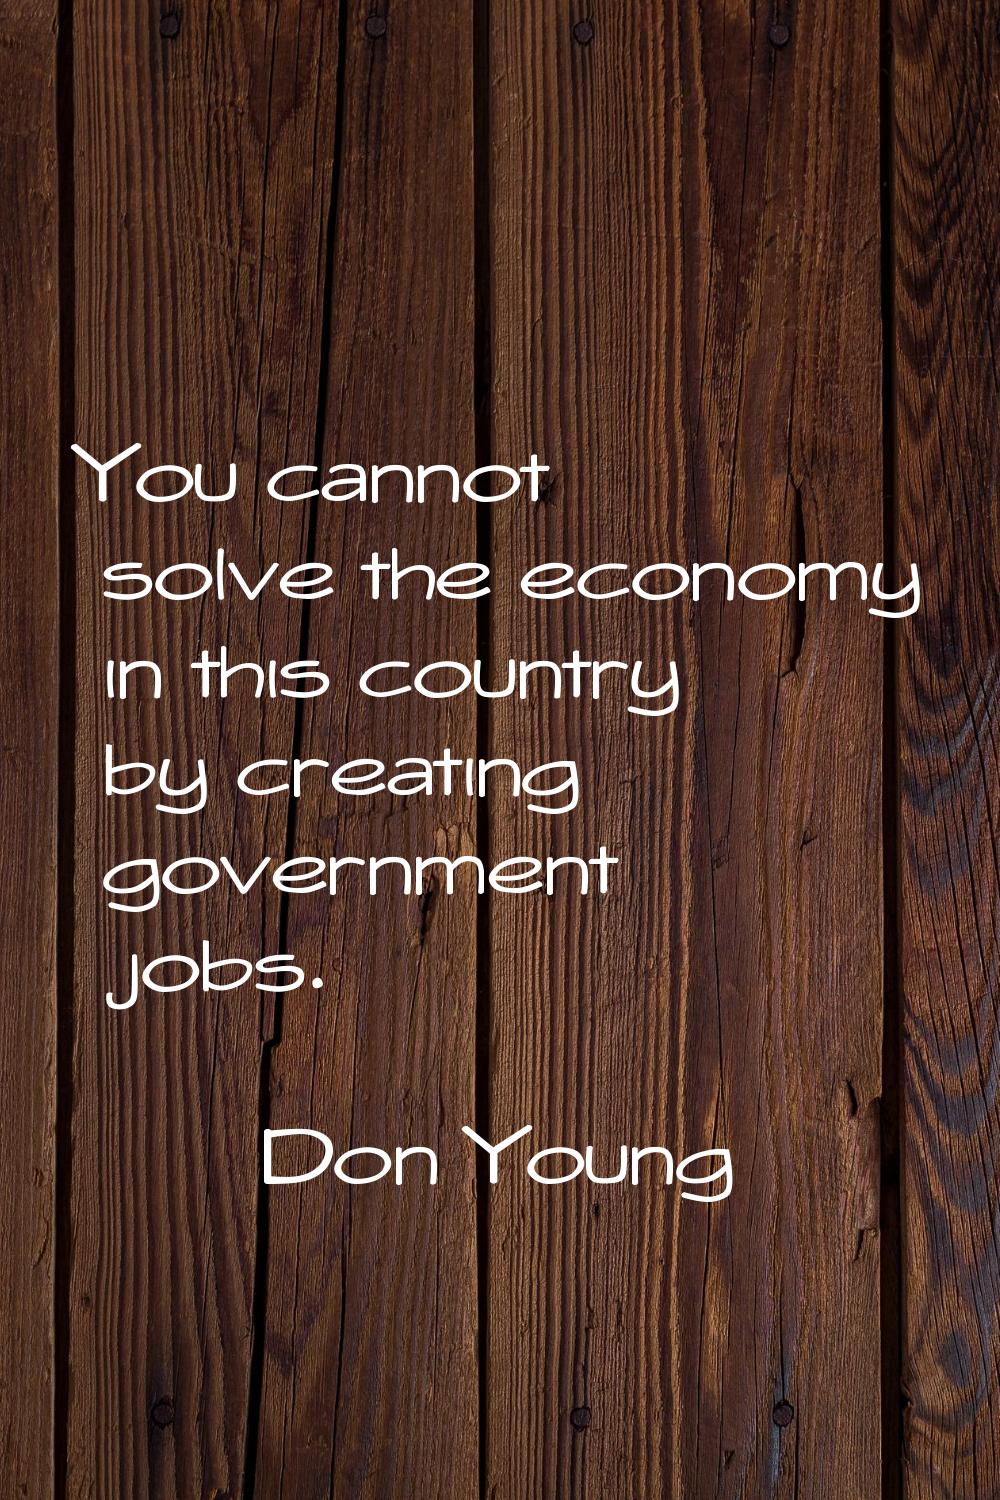 You cannot solve the economy in this country by creating government jobs.